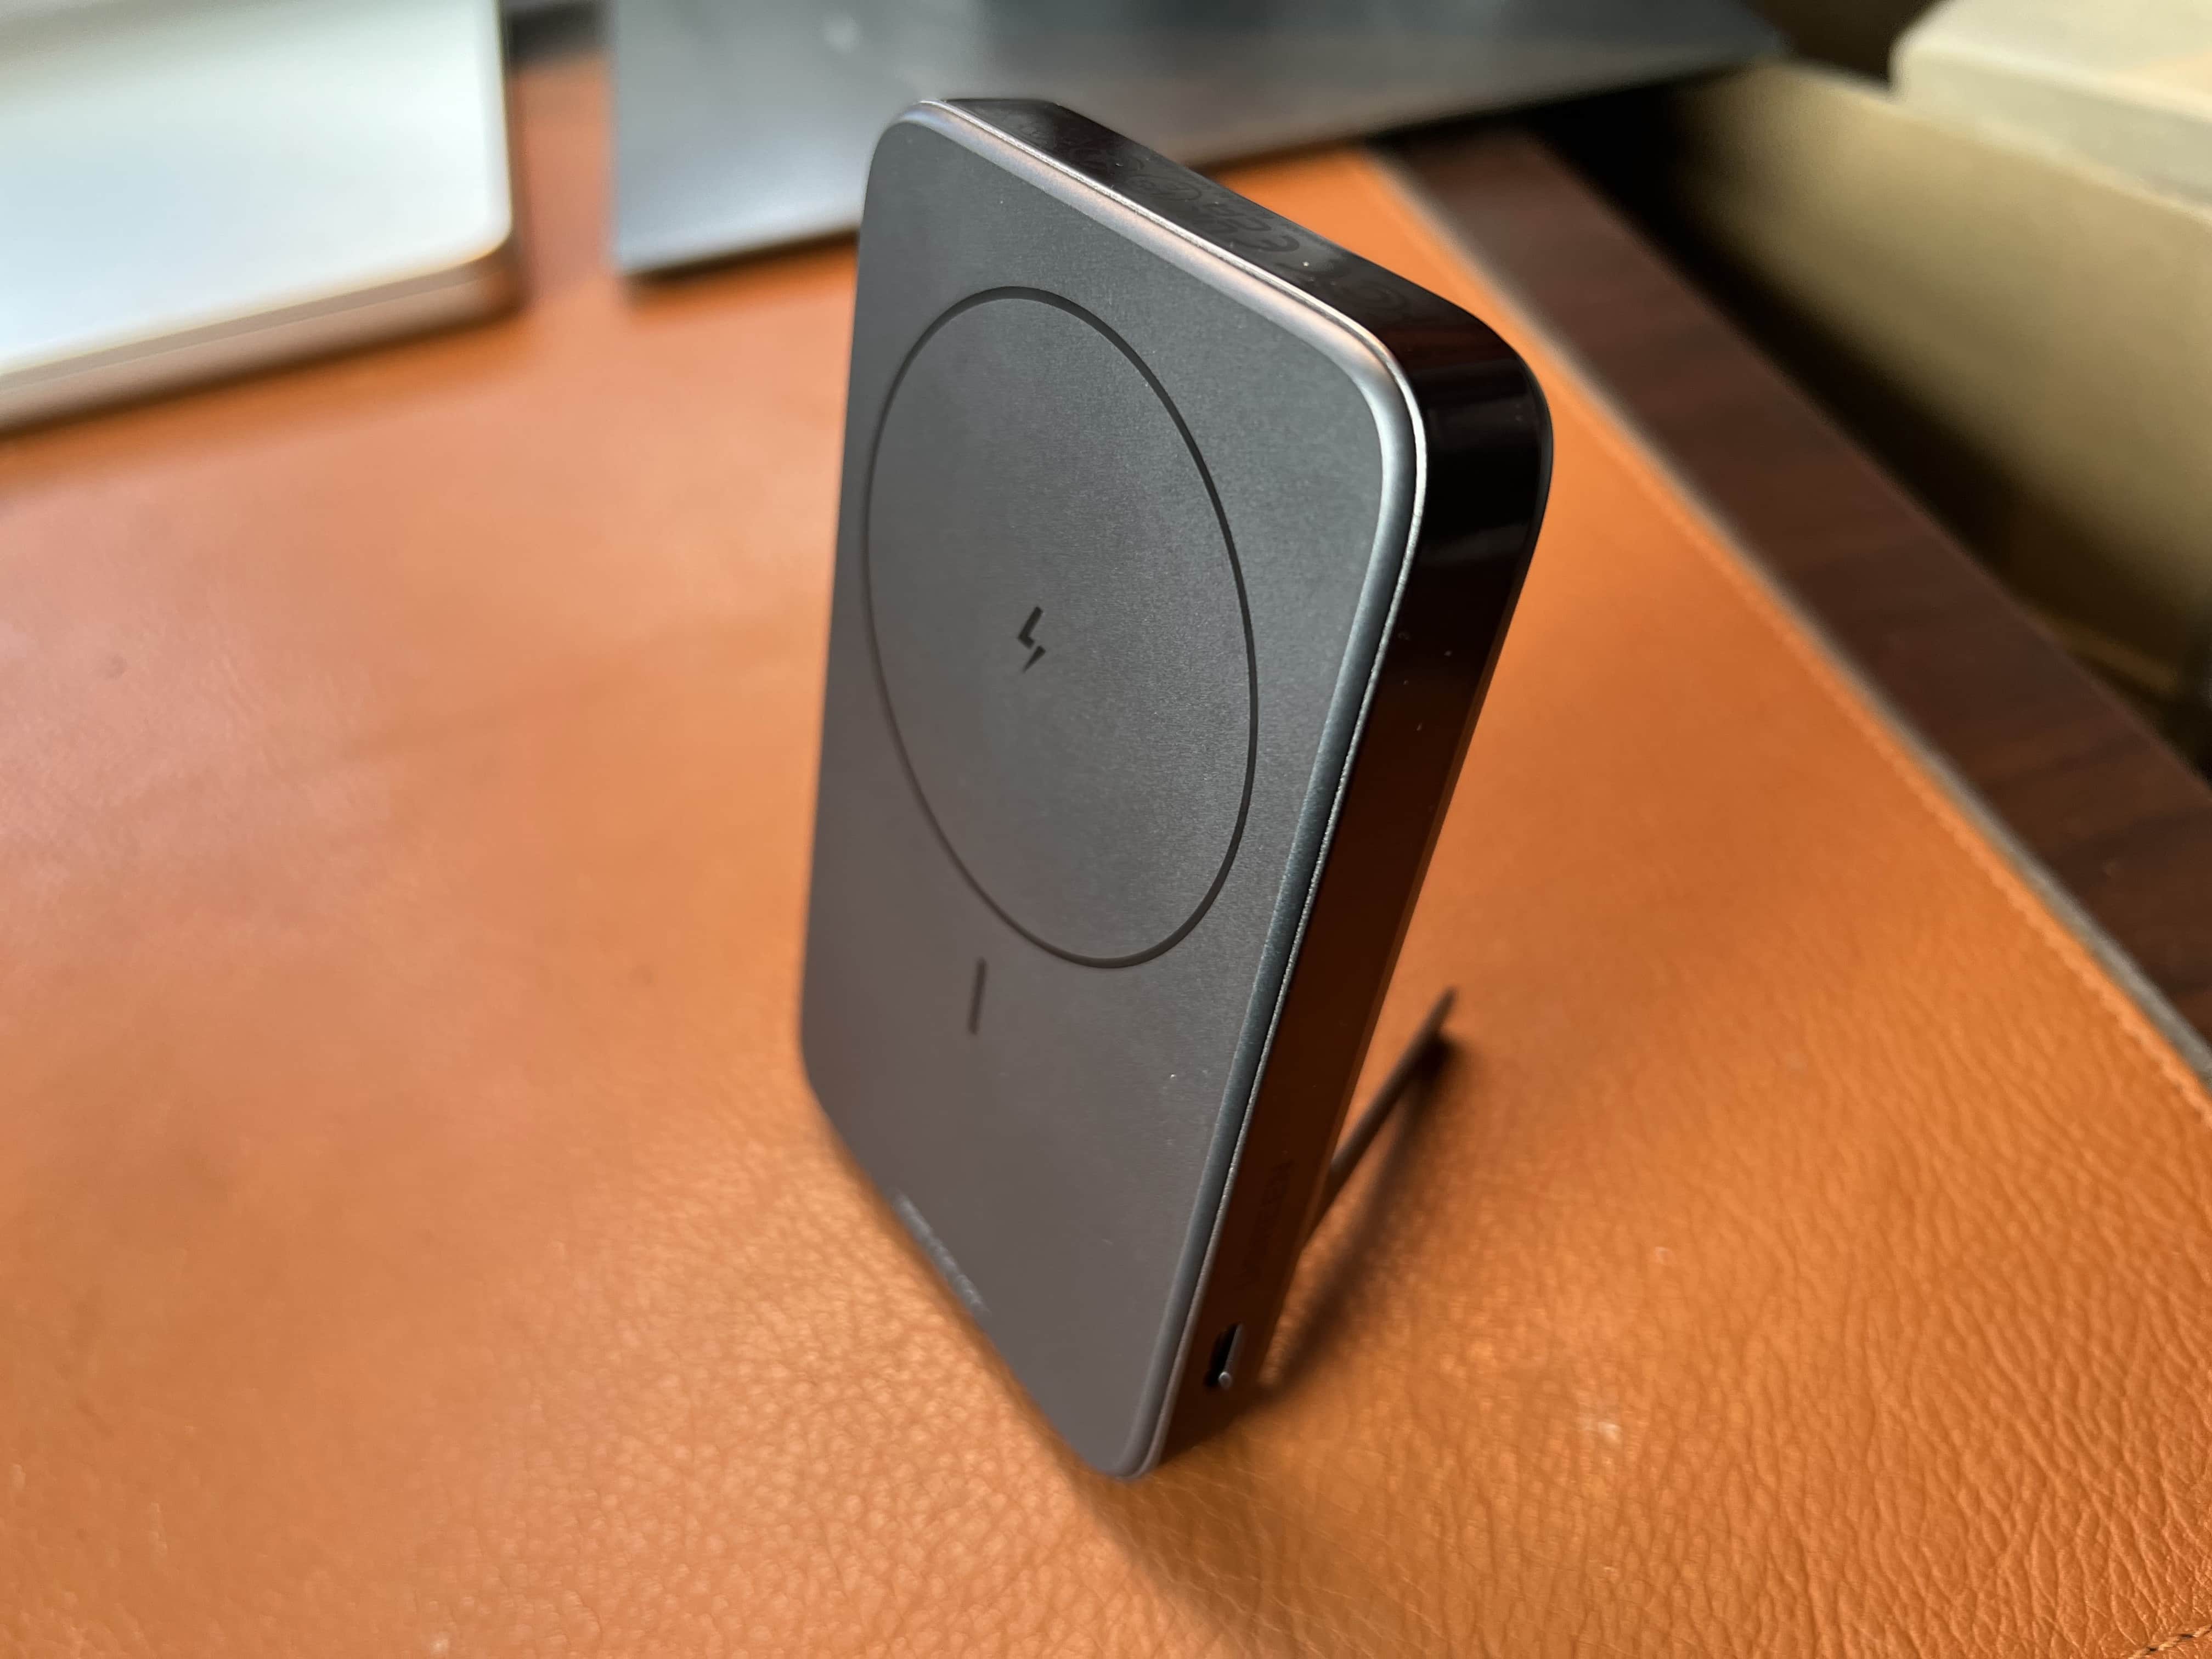 Power up iPhone and more with this 3-in-1 kickstand battery [Review]